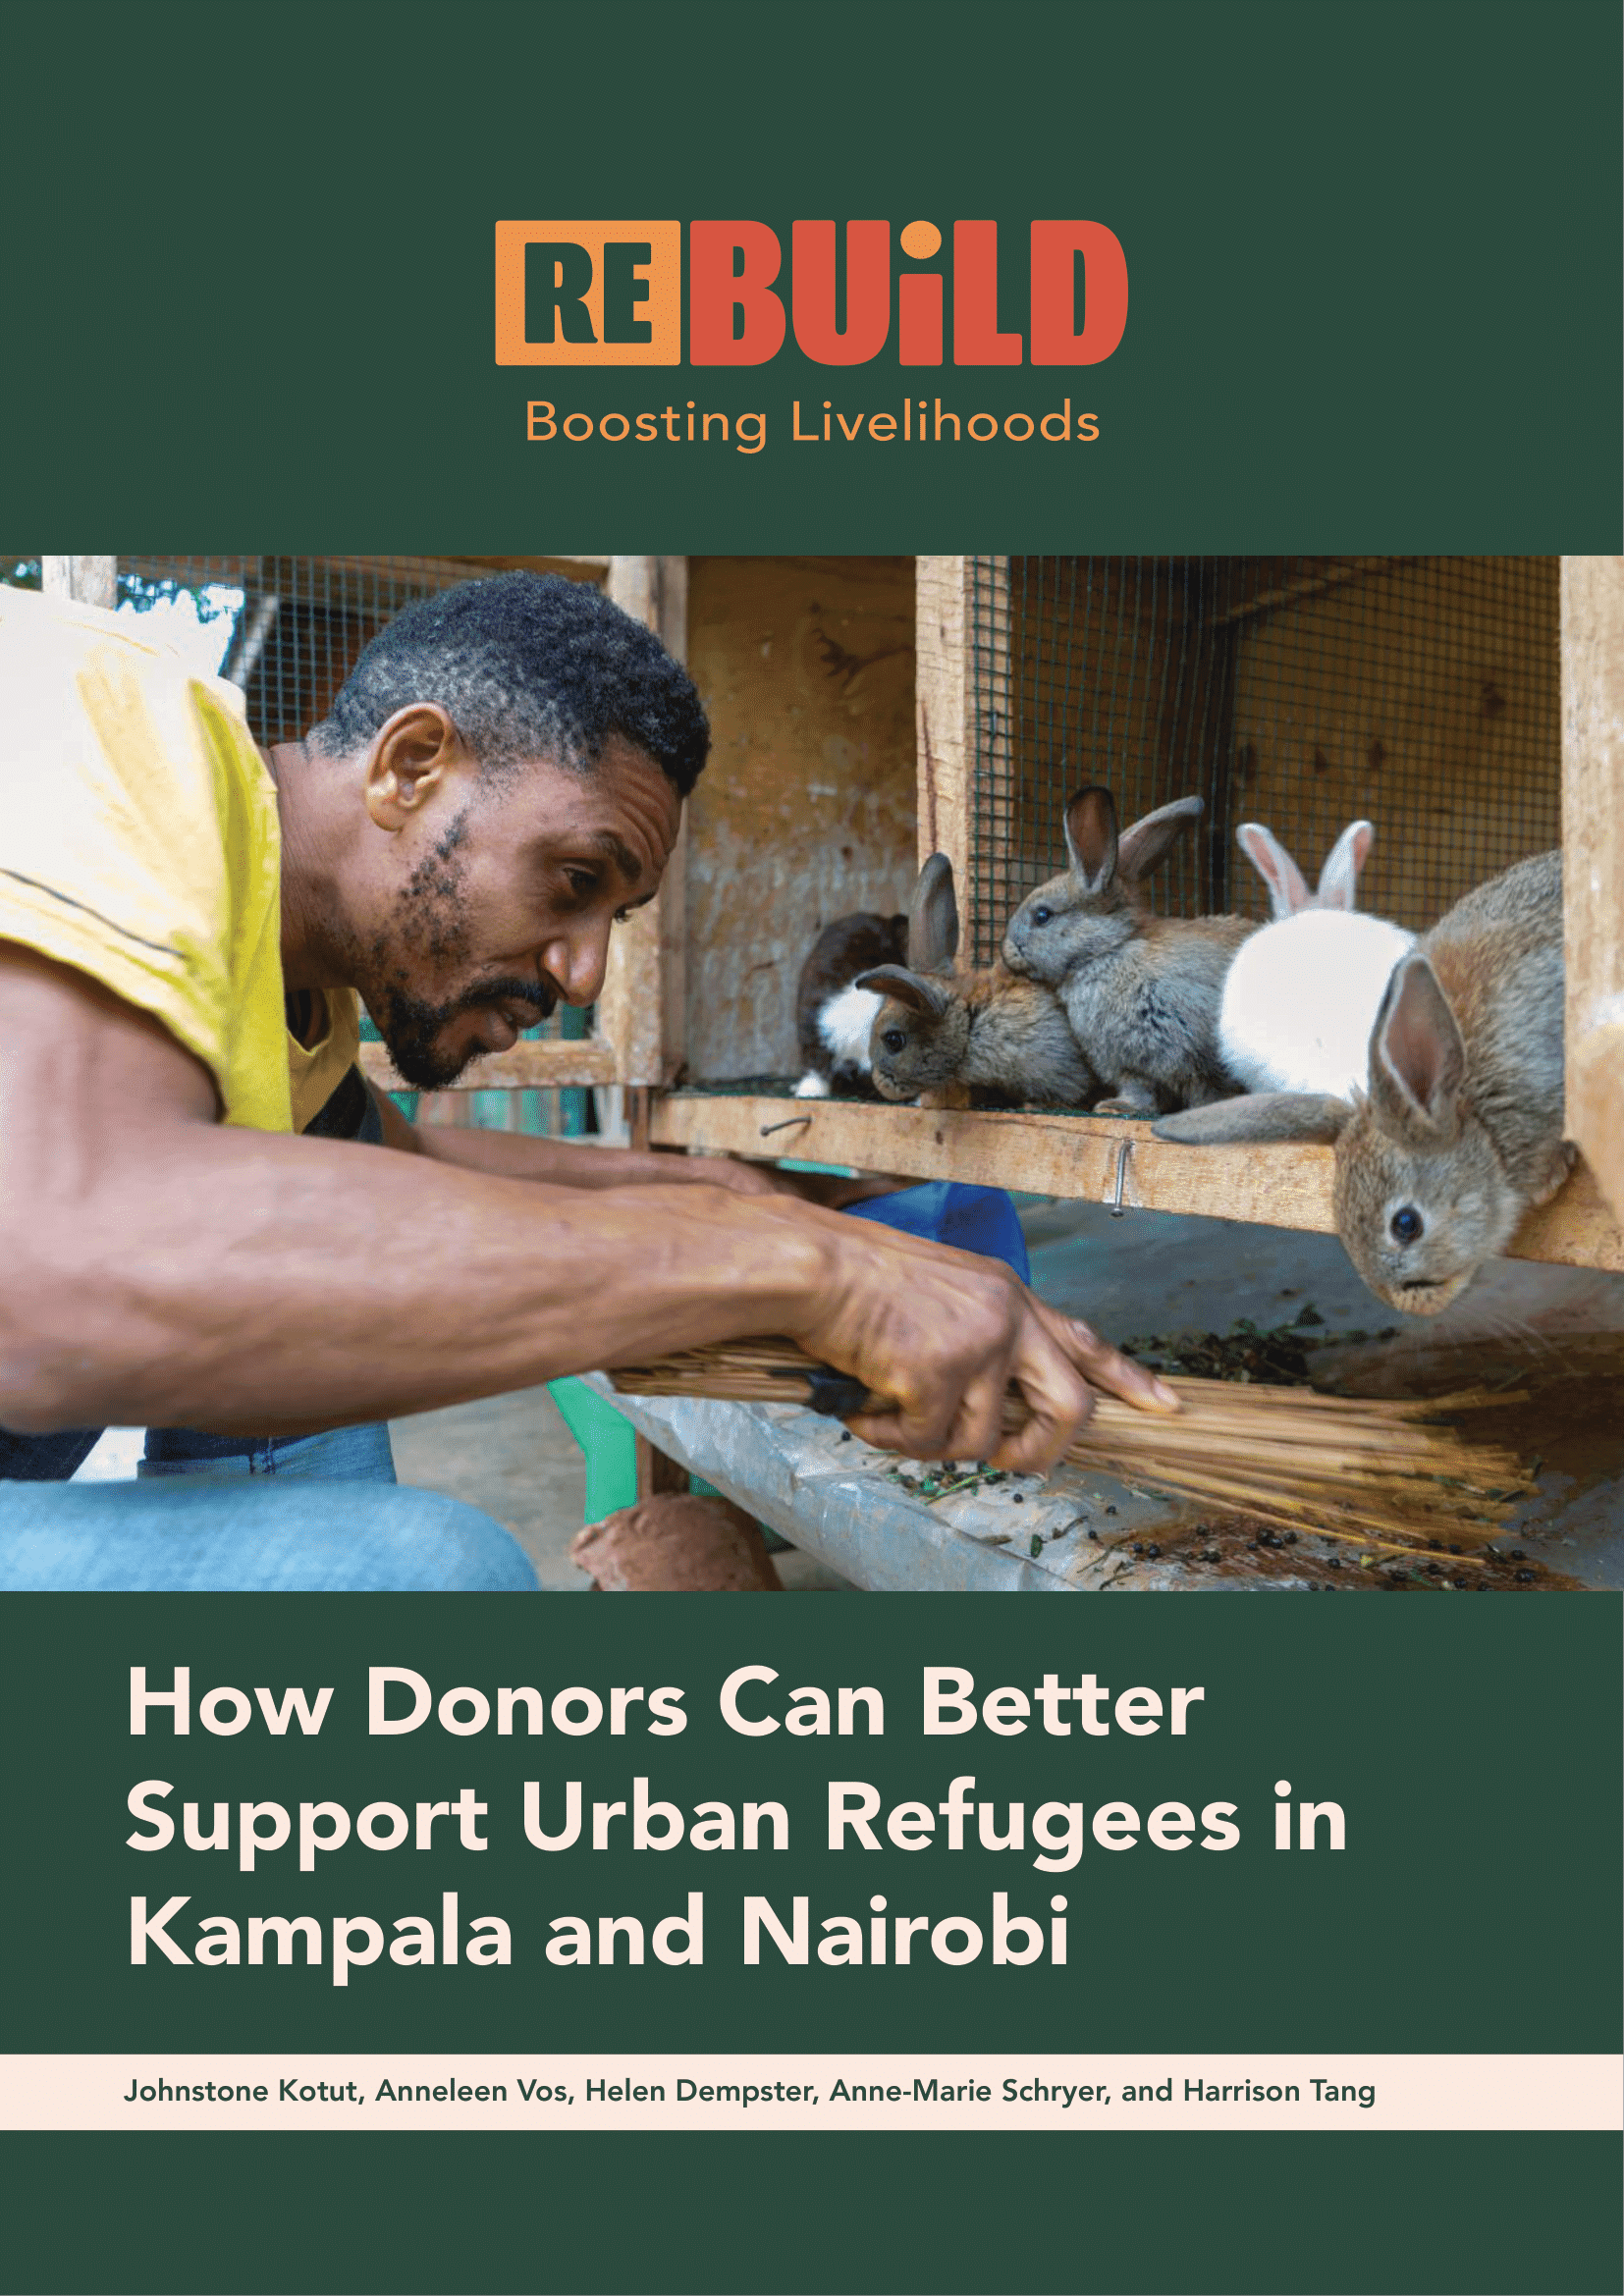 How Donors Can Better Support Urban Refugees